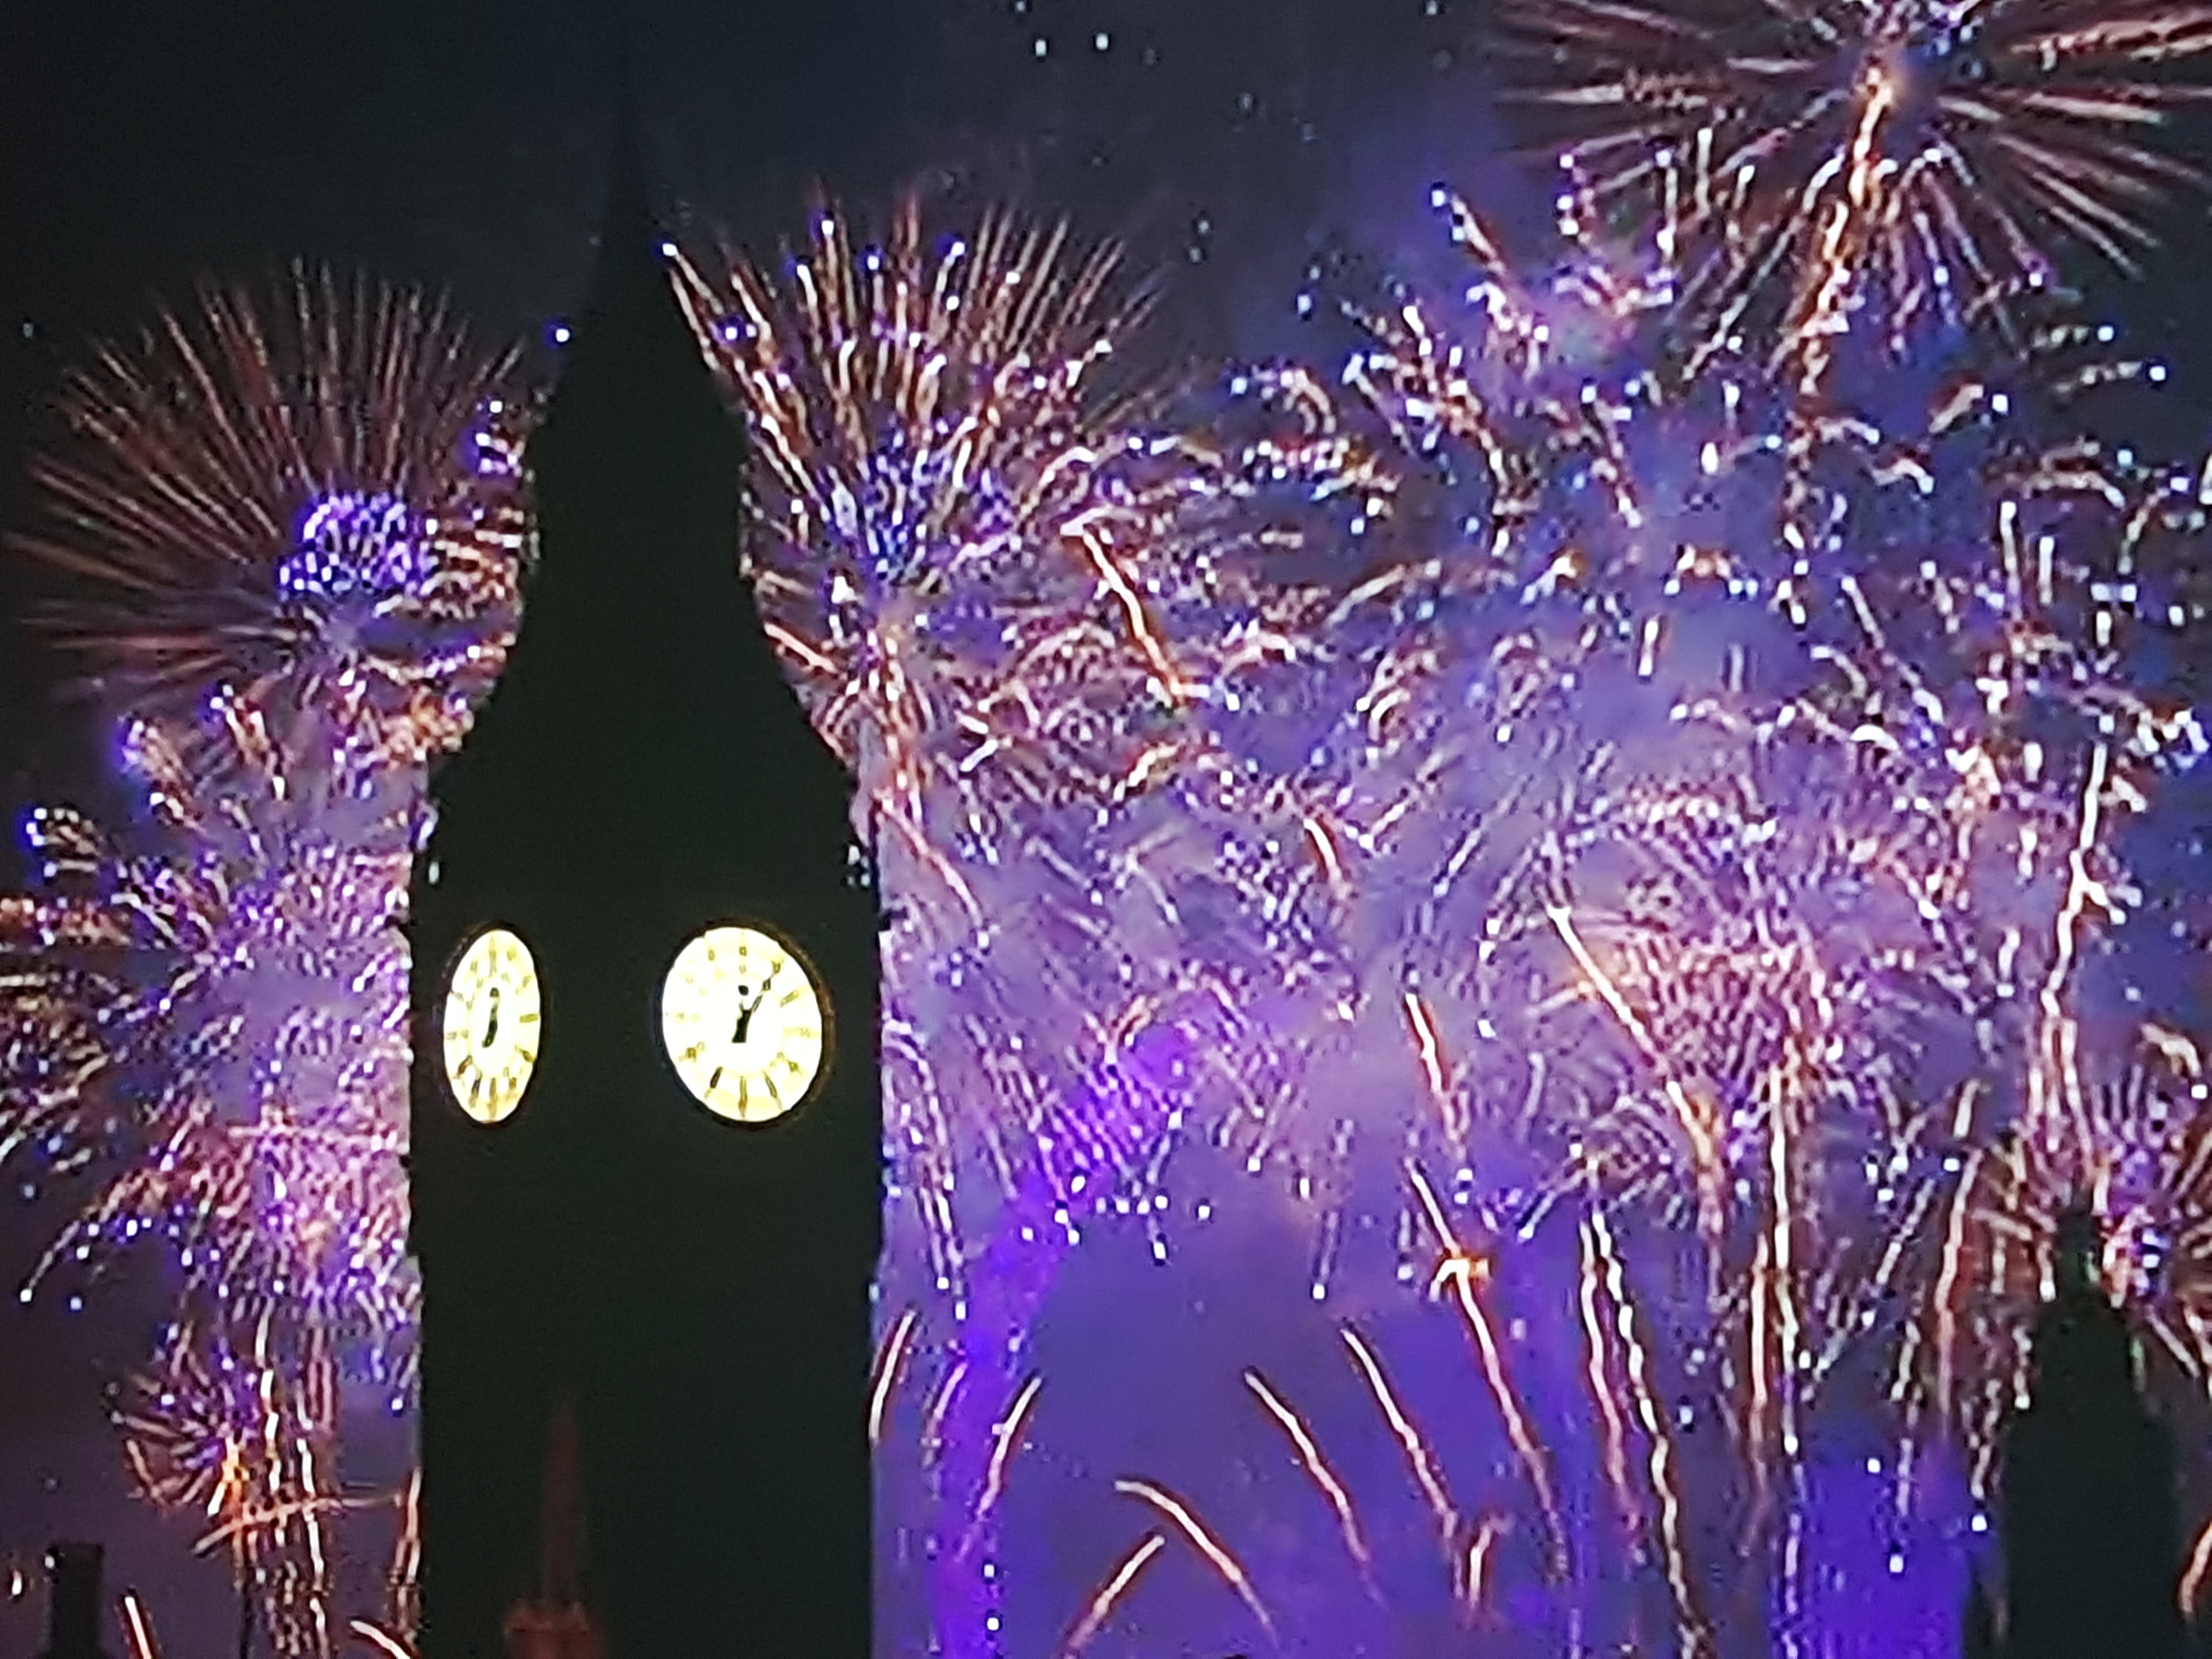 London's Big Ben brings in the New Year